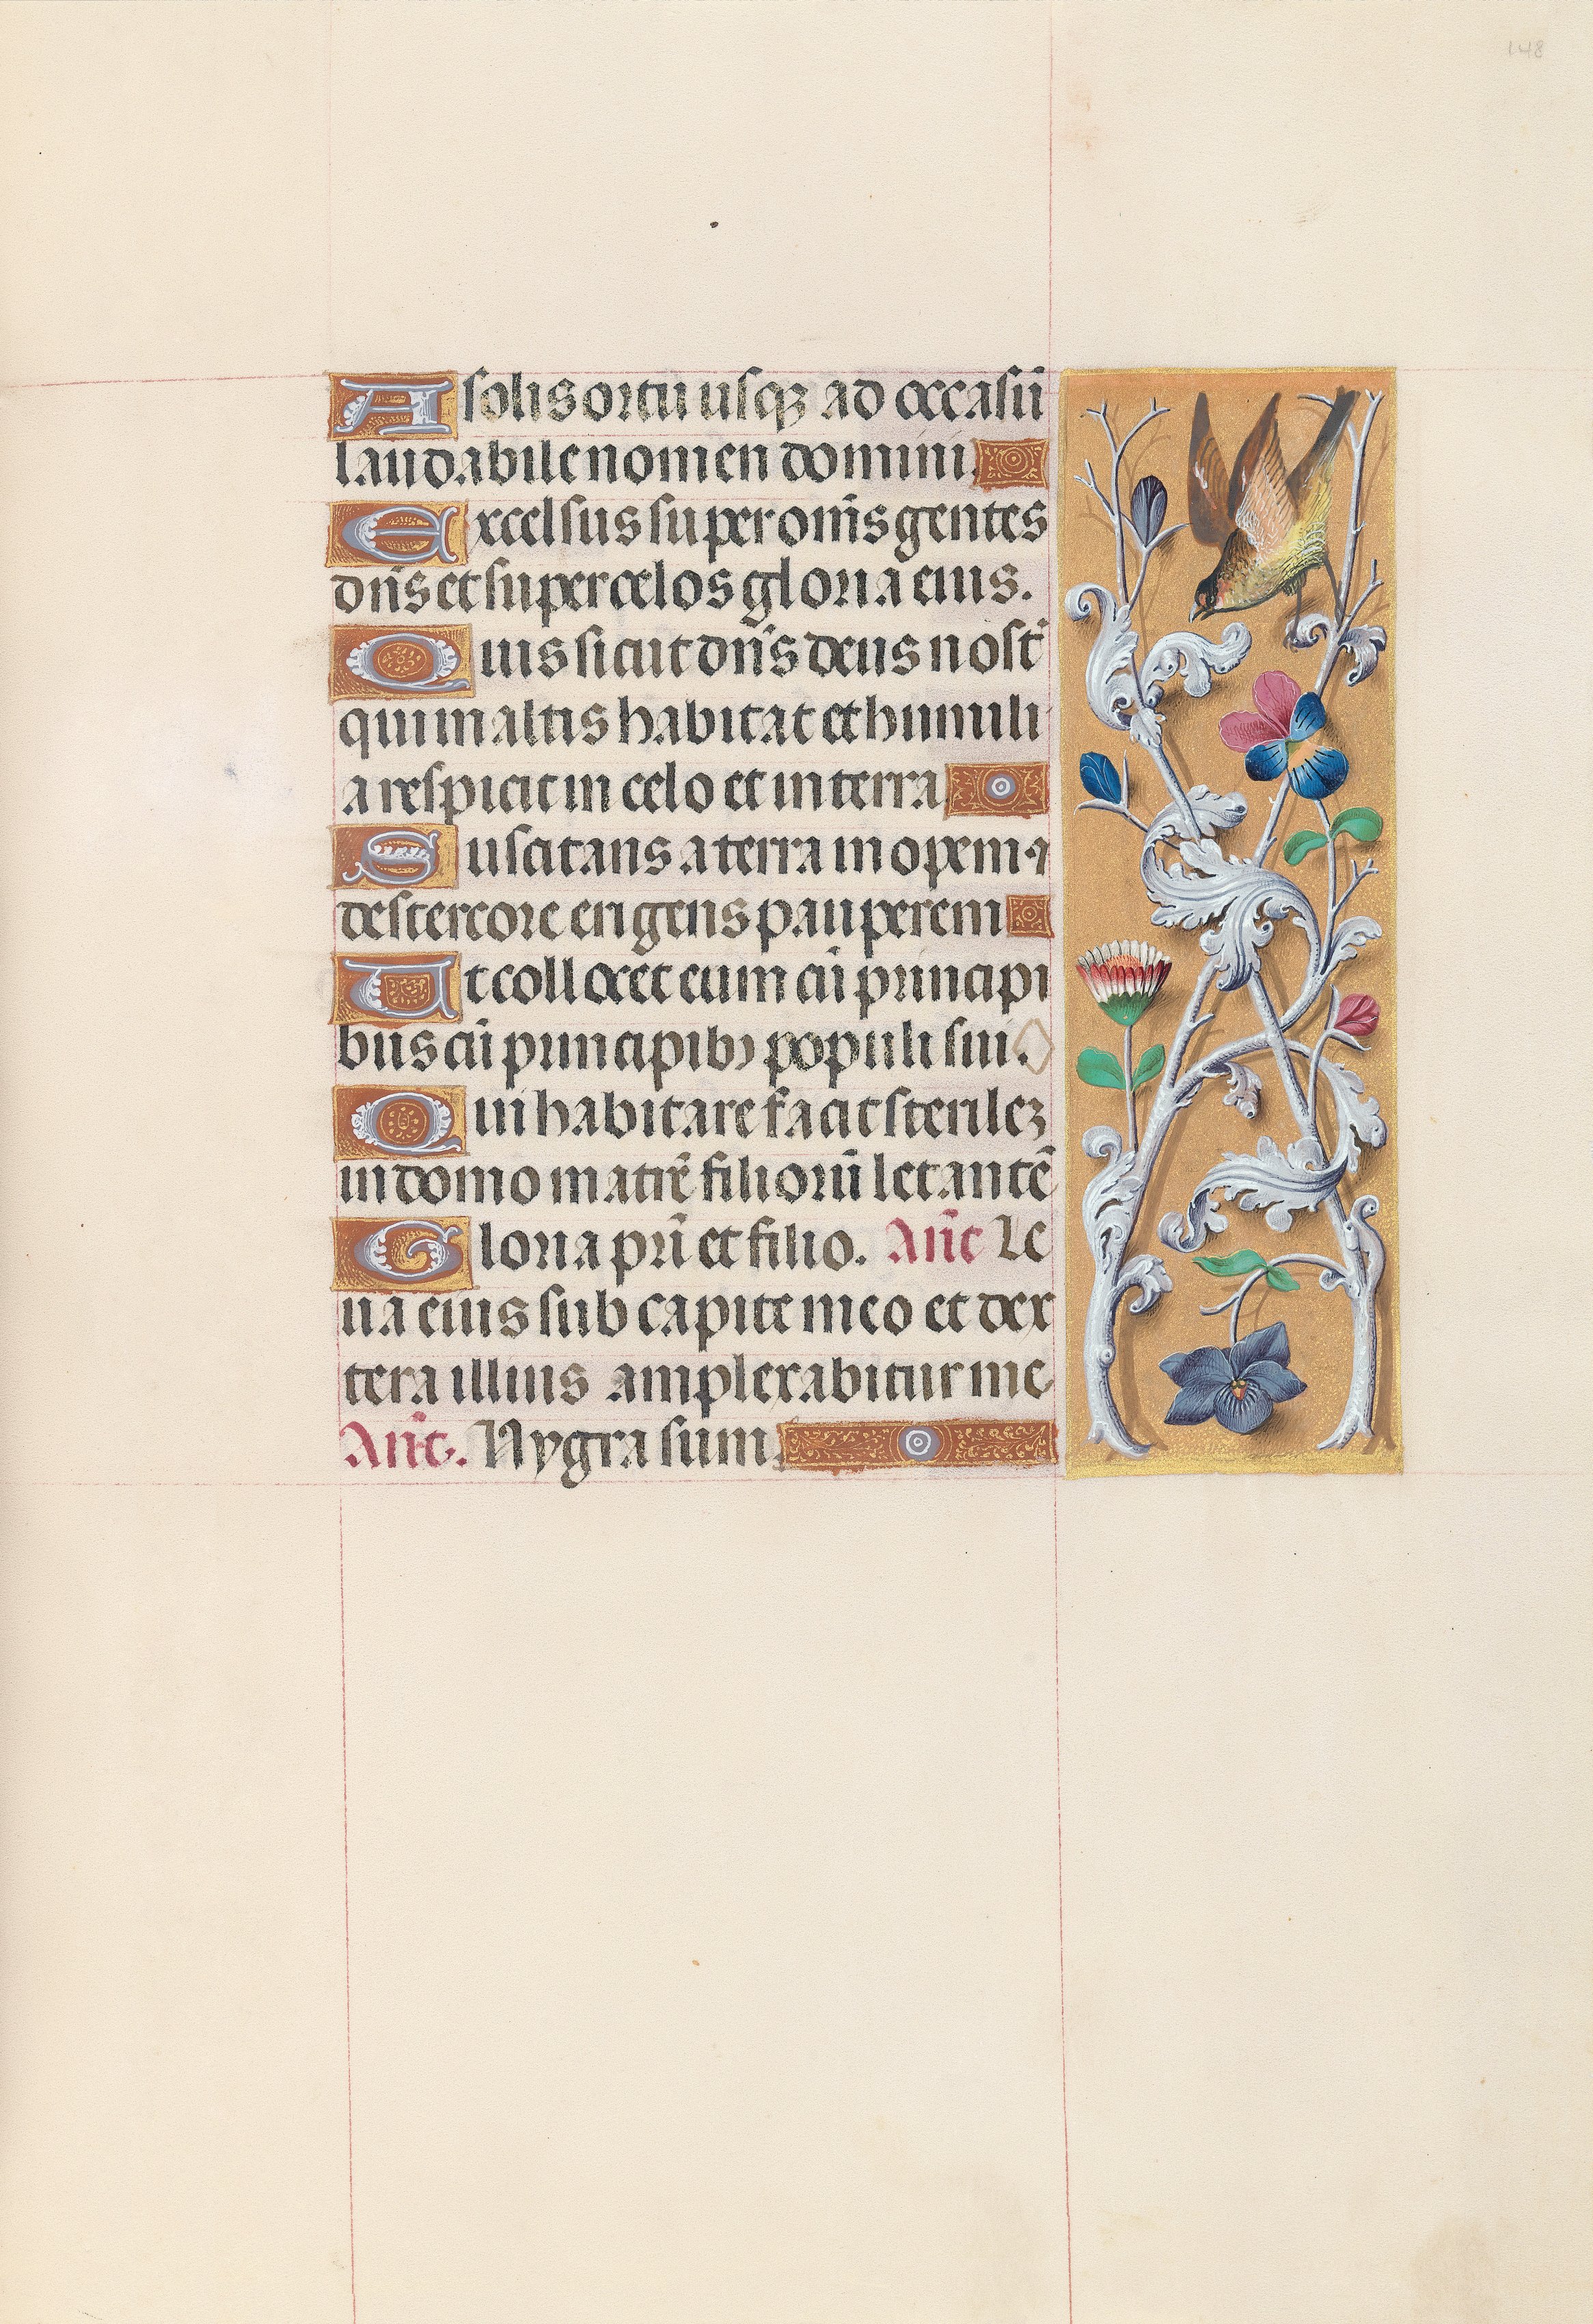 Hours of Queen Isabella the Catholic, Queen of Spain:  Fol. 148r